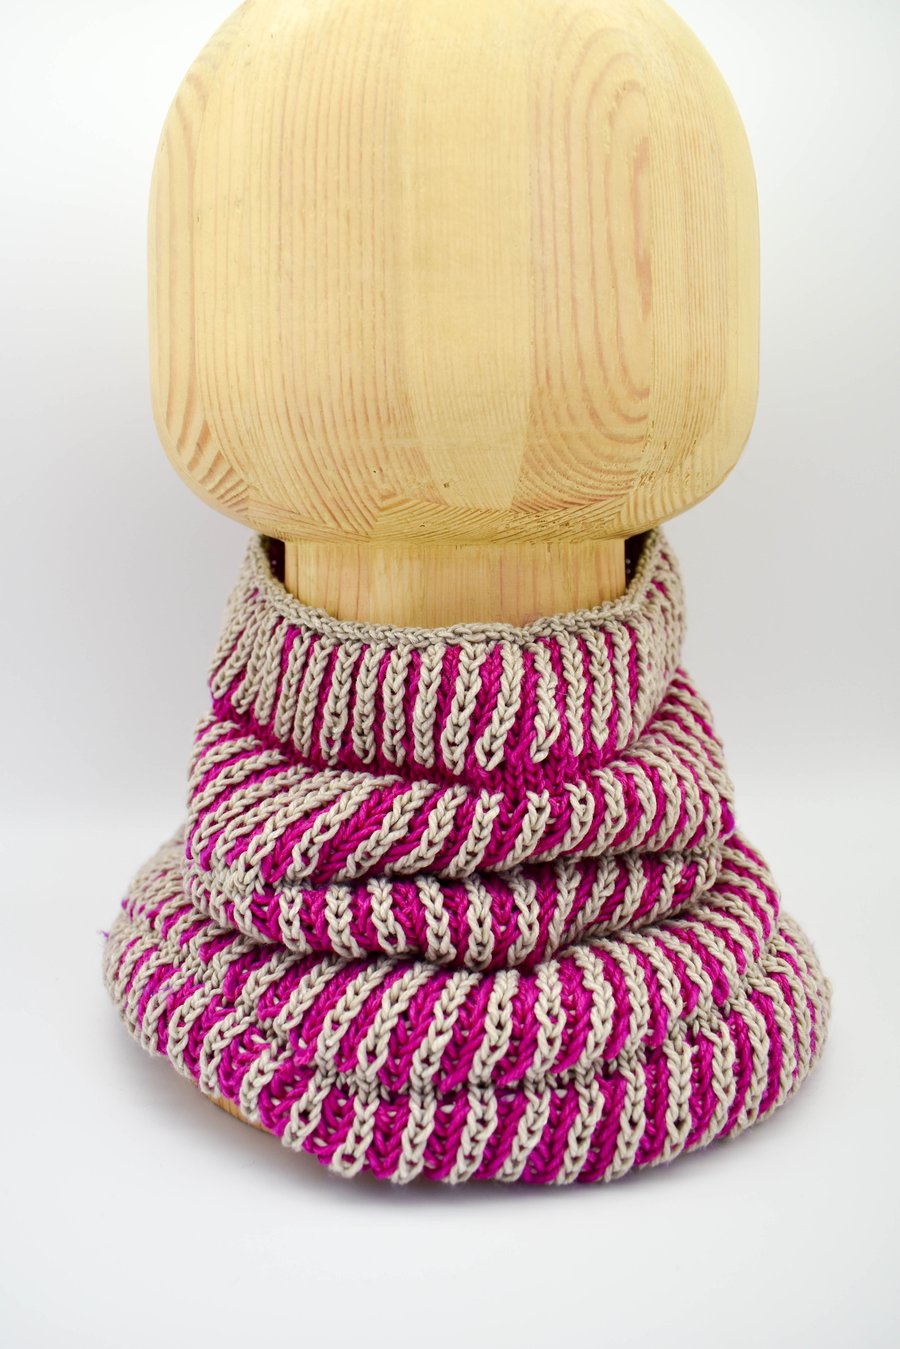 Hand knitted Brioche Infinity Cowl - Fuschia pink and beige